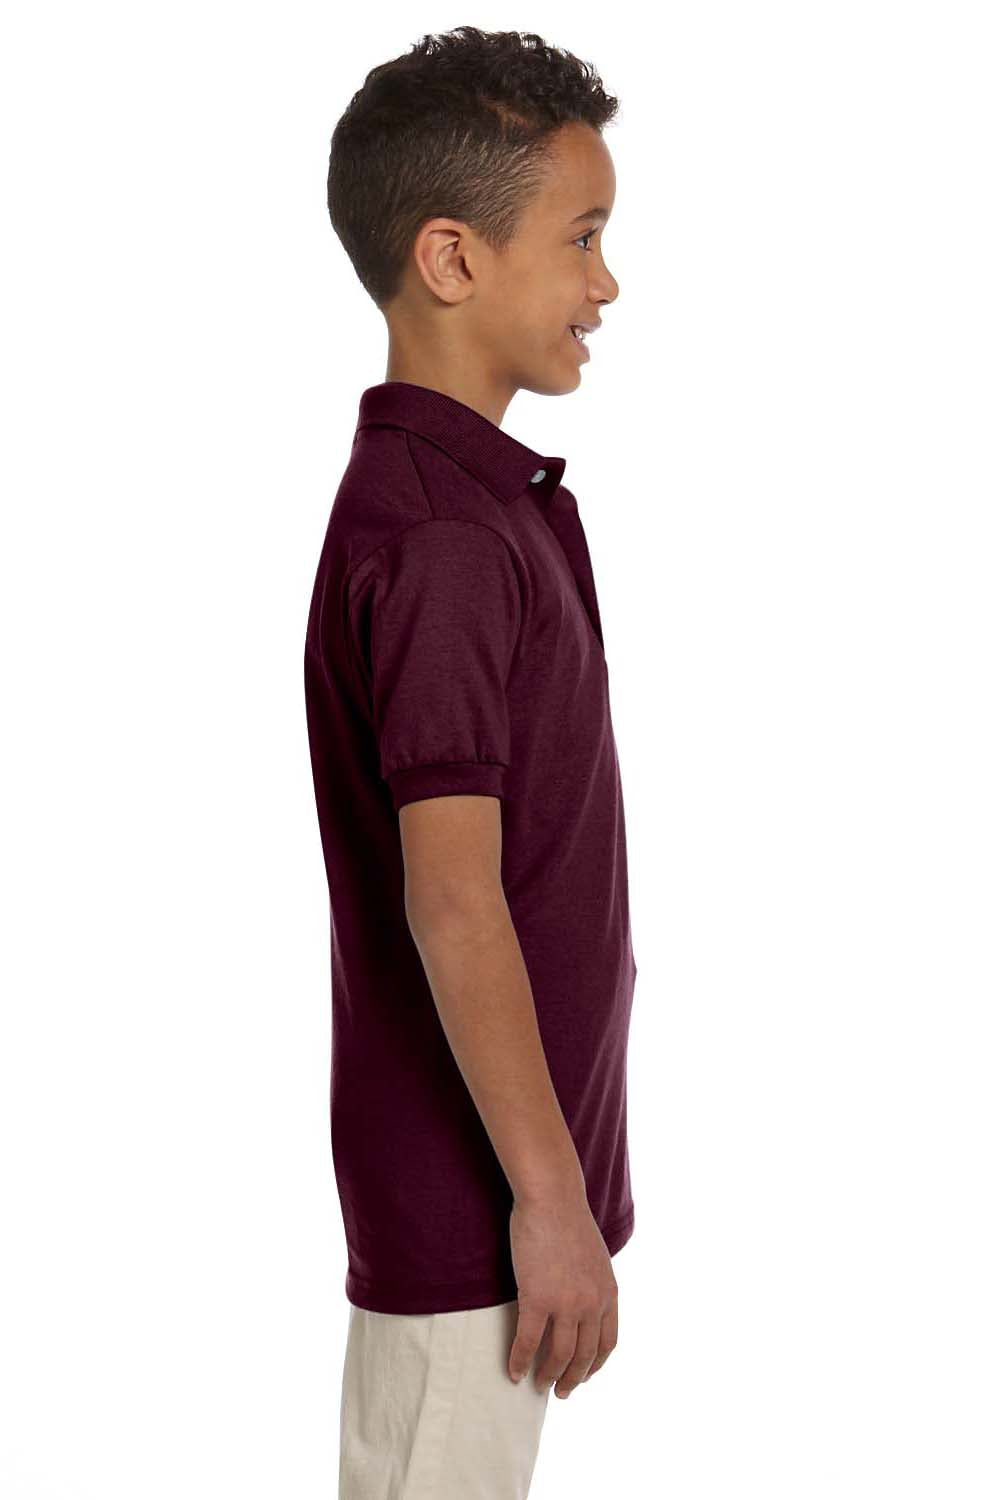 Jerzees 437Y Youth SpotShield Stain Resistant Short Sleeve Polo Shirt Maroon Side